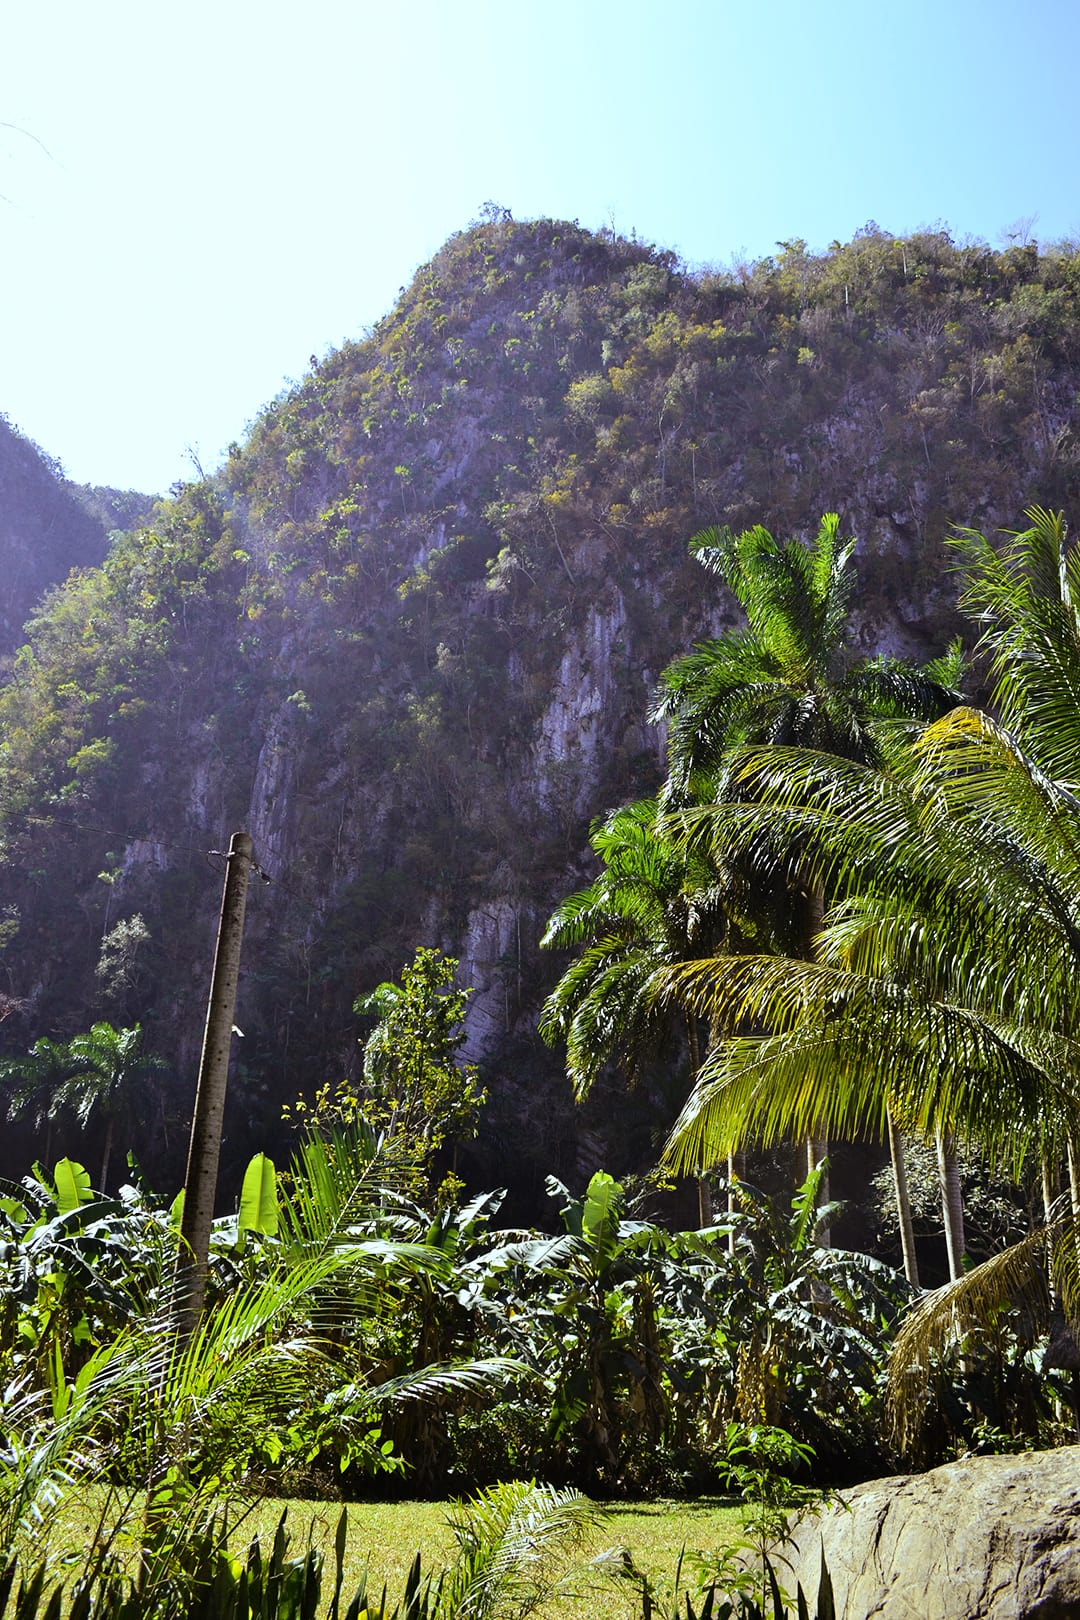 How to Travel to Cuba: Vinales Hike